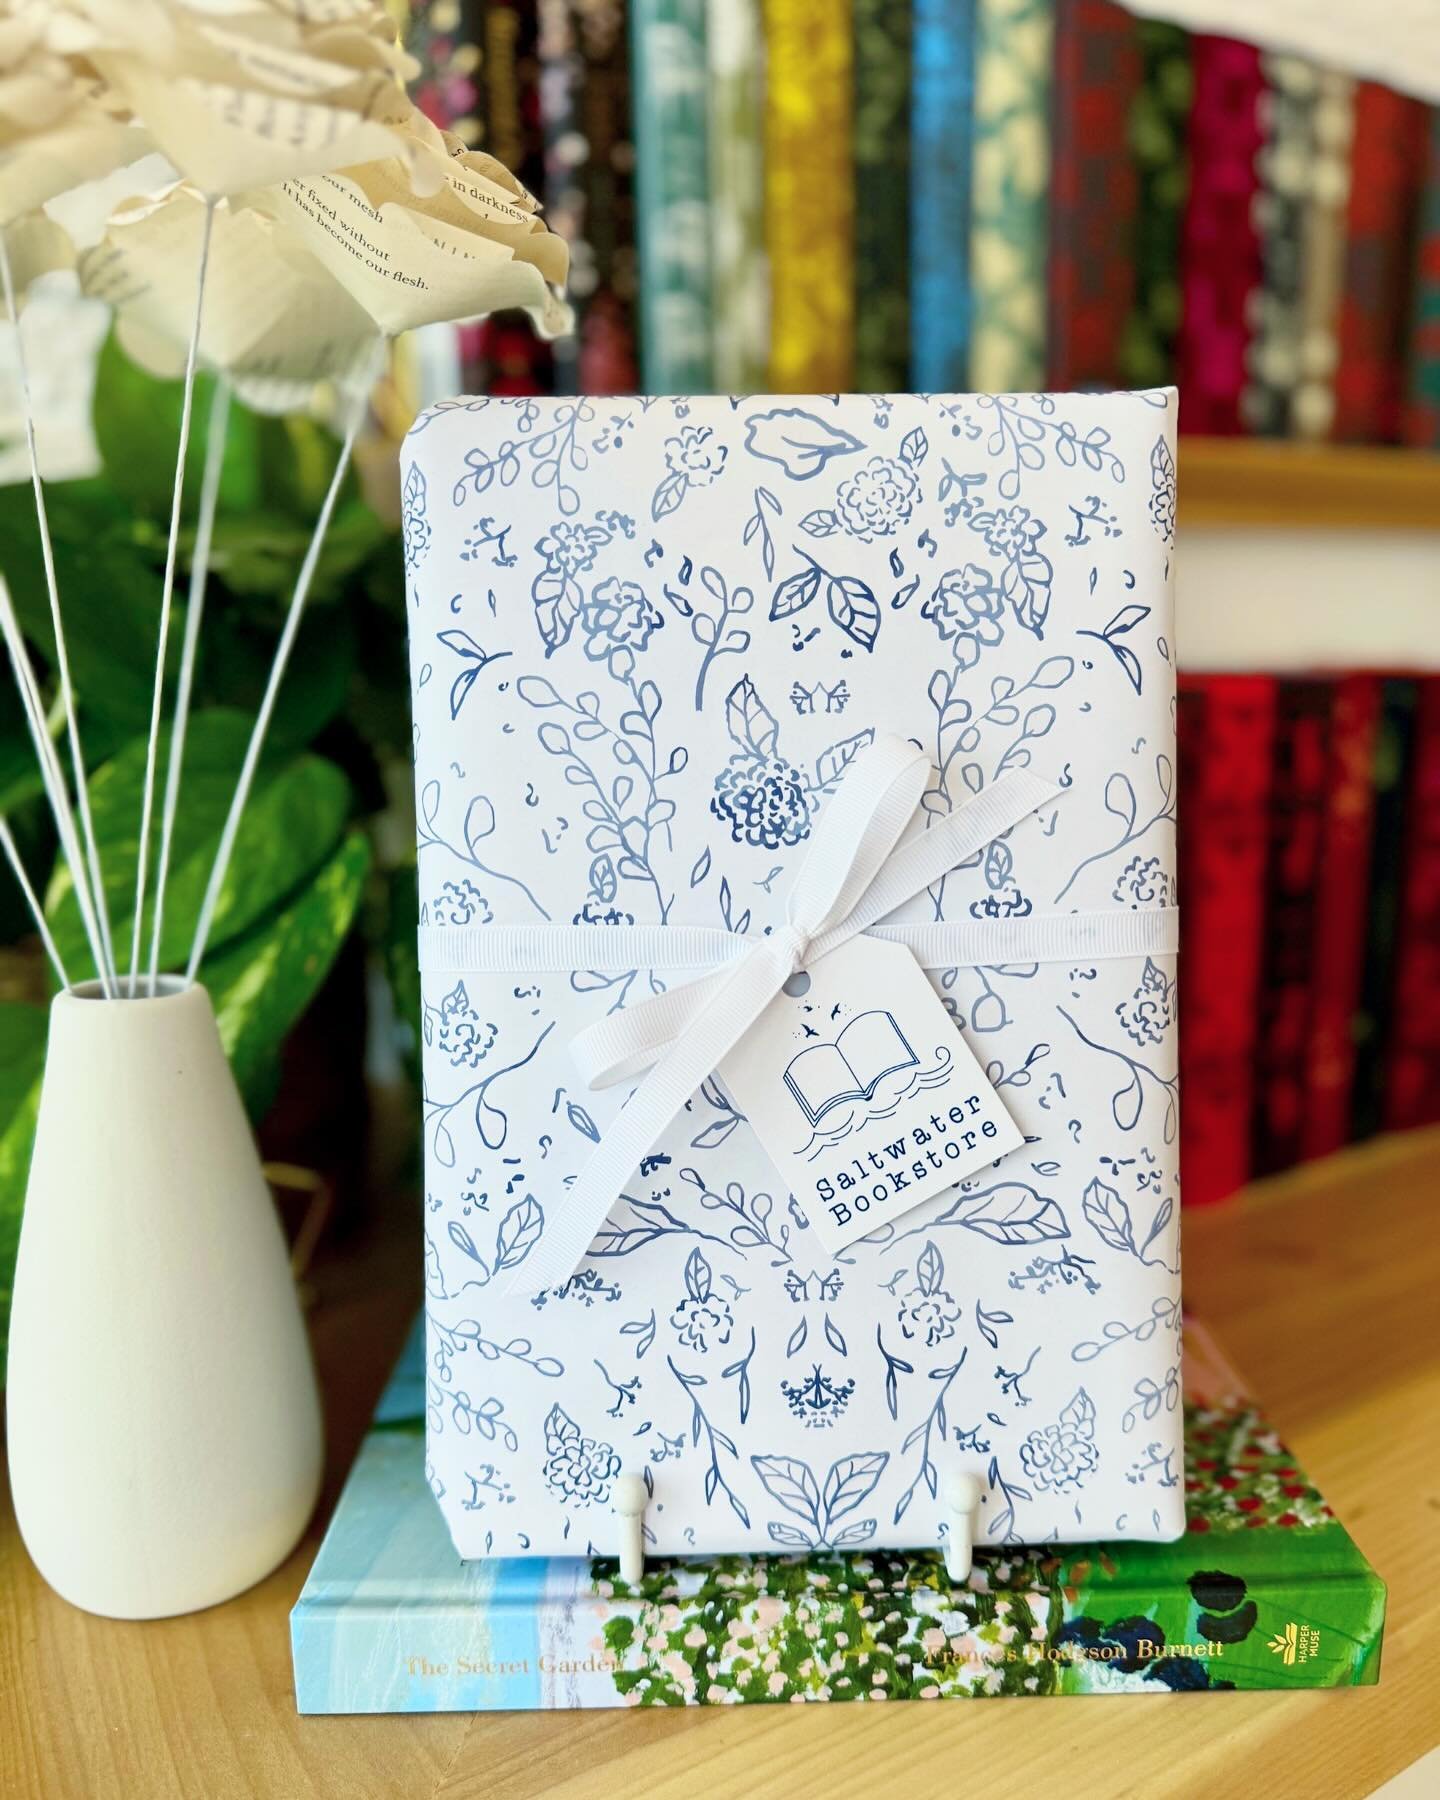 Gift it! 📘

Introducing our newest wrapping paper to our much-loved line up: A delicate floral design in classic blue and white. Double-sided with gingham on the inside, this new paper will be a perfect choice for all your upcoming Spring events: Mo